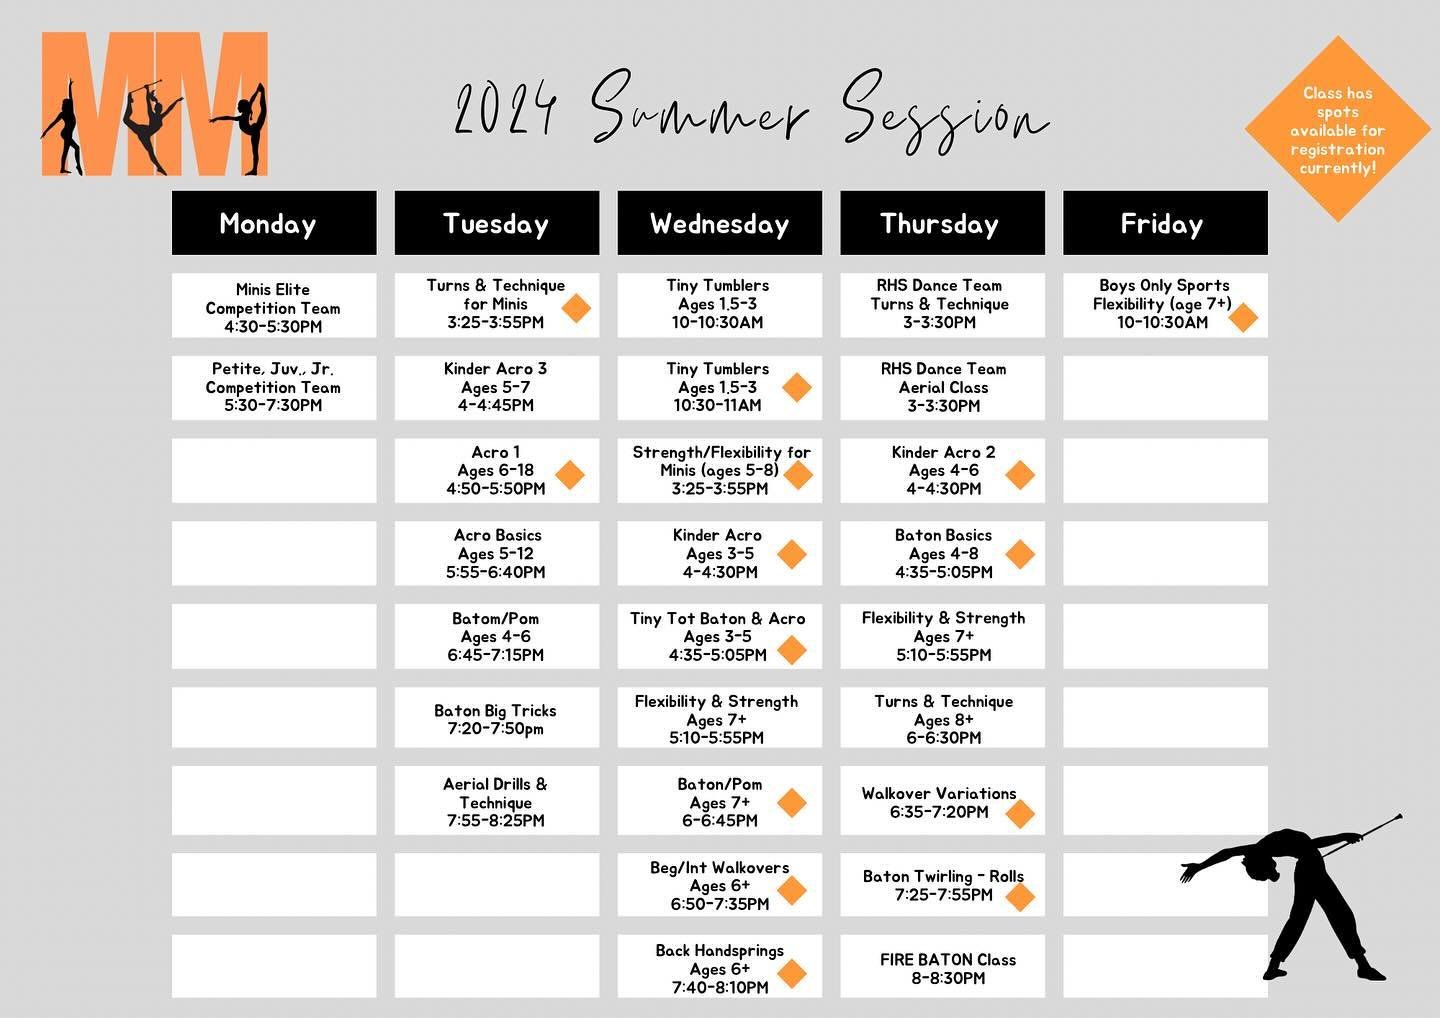 Save this Summer Schedule! 🧡✨👏🏻

Parents who have registered already, save this to your phones as a quick reference for your child&rsquo;s summer classes, what time they start/finish each day, etc.

If you have a child interested but not yet regis